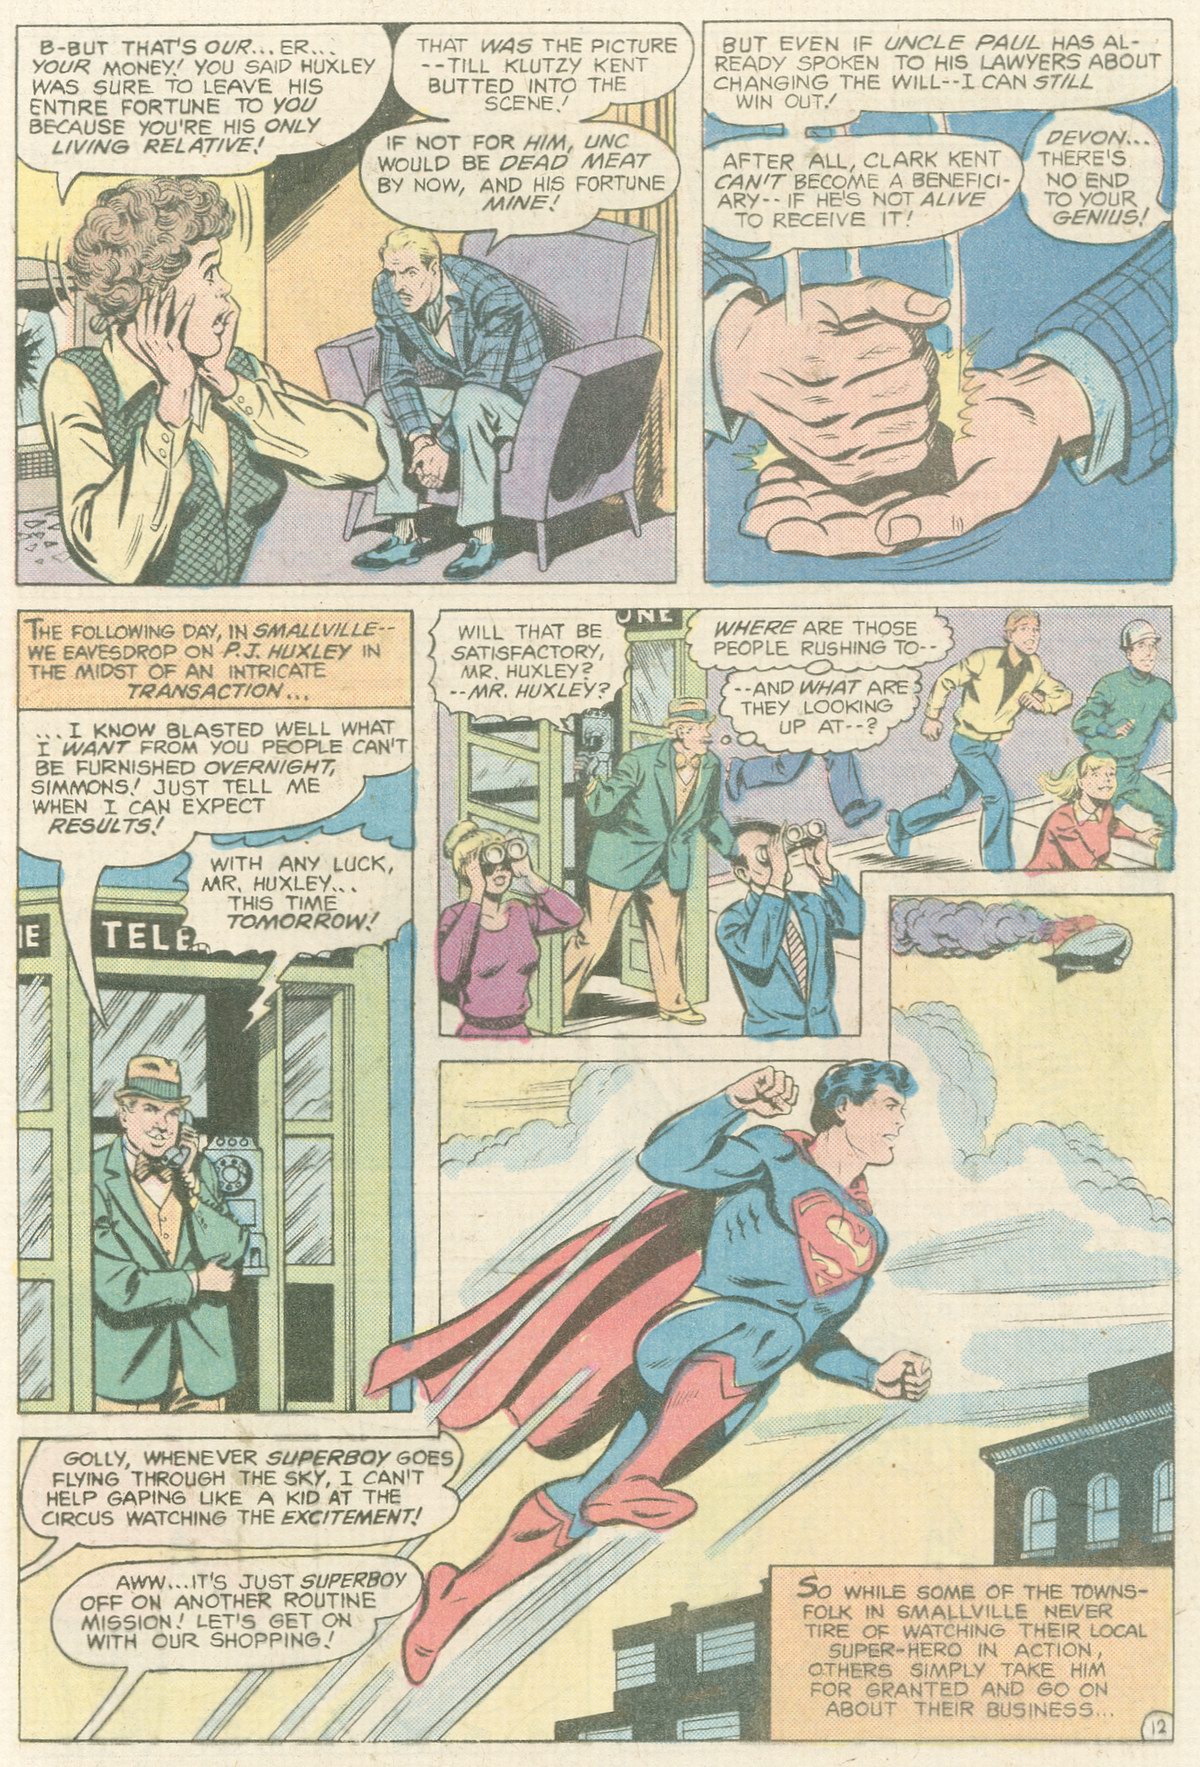 The New Adventures of Superboy 12 Page 12